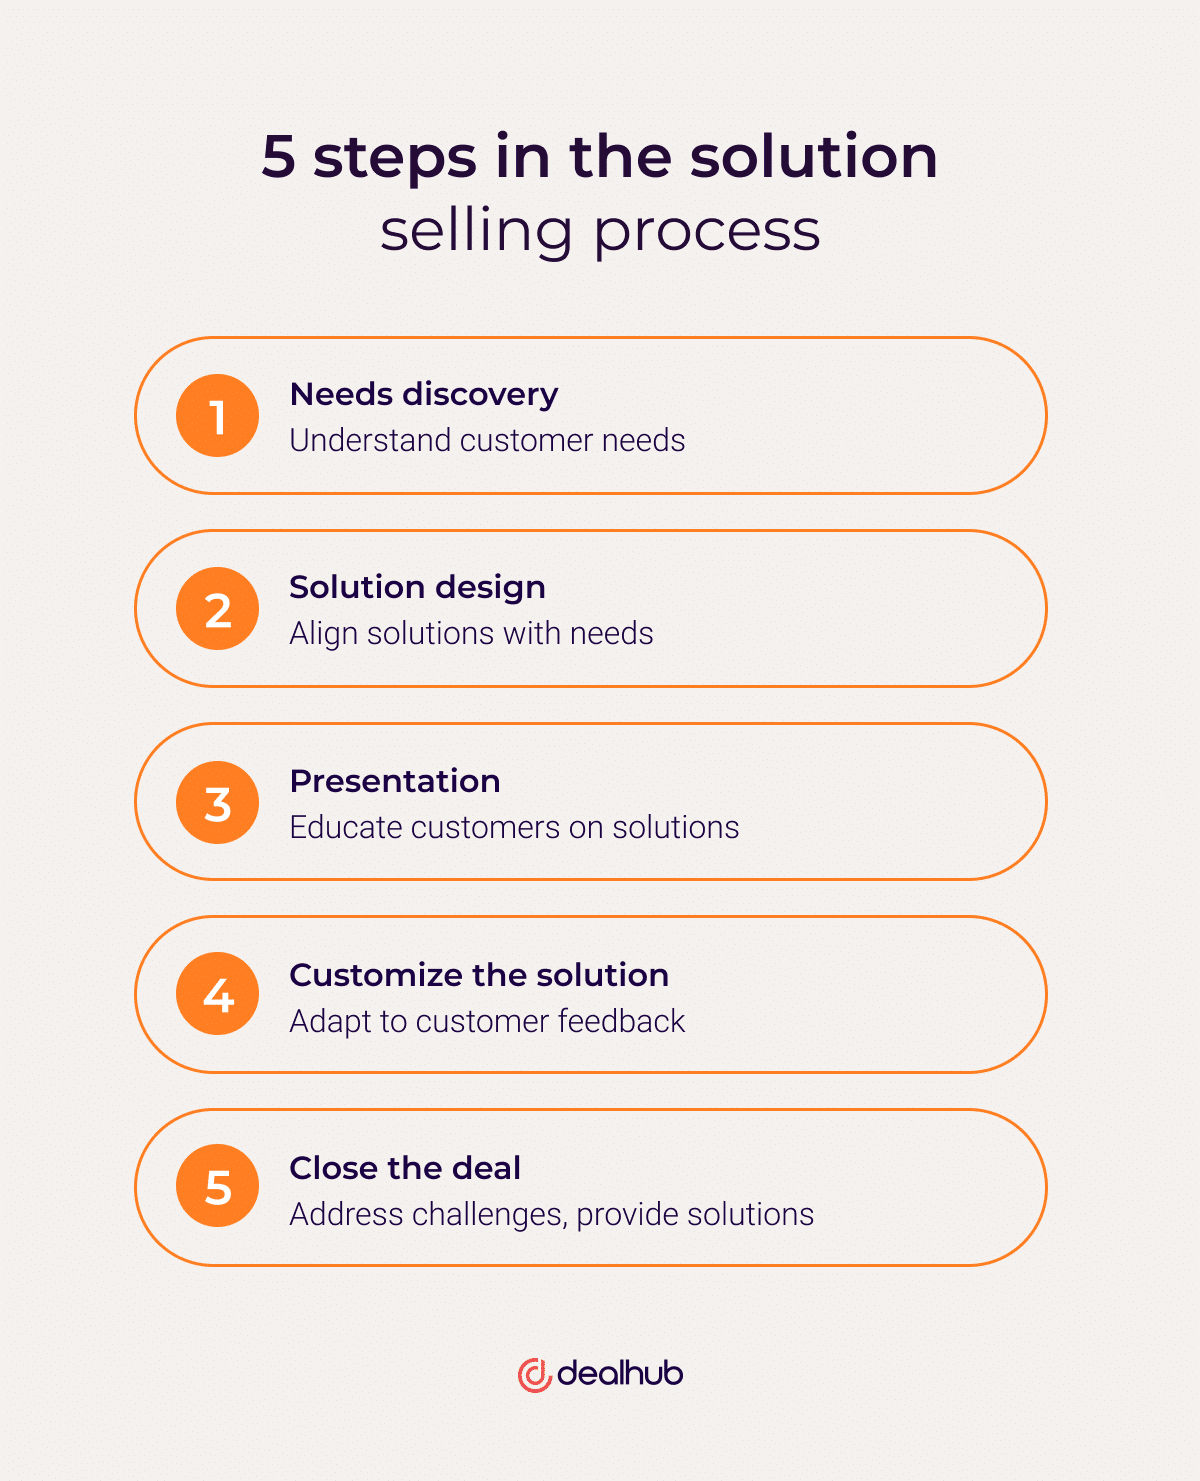 5 steps in the Solution Selling process